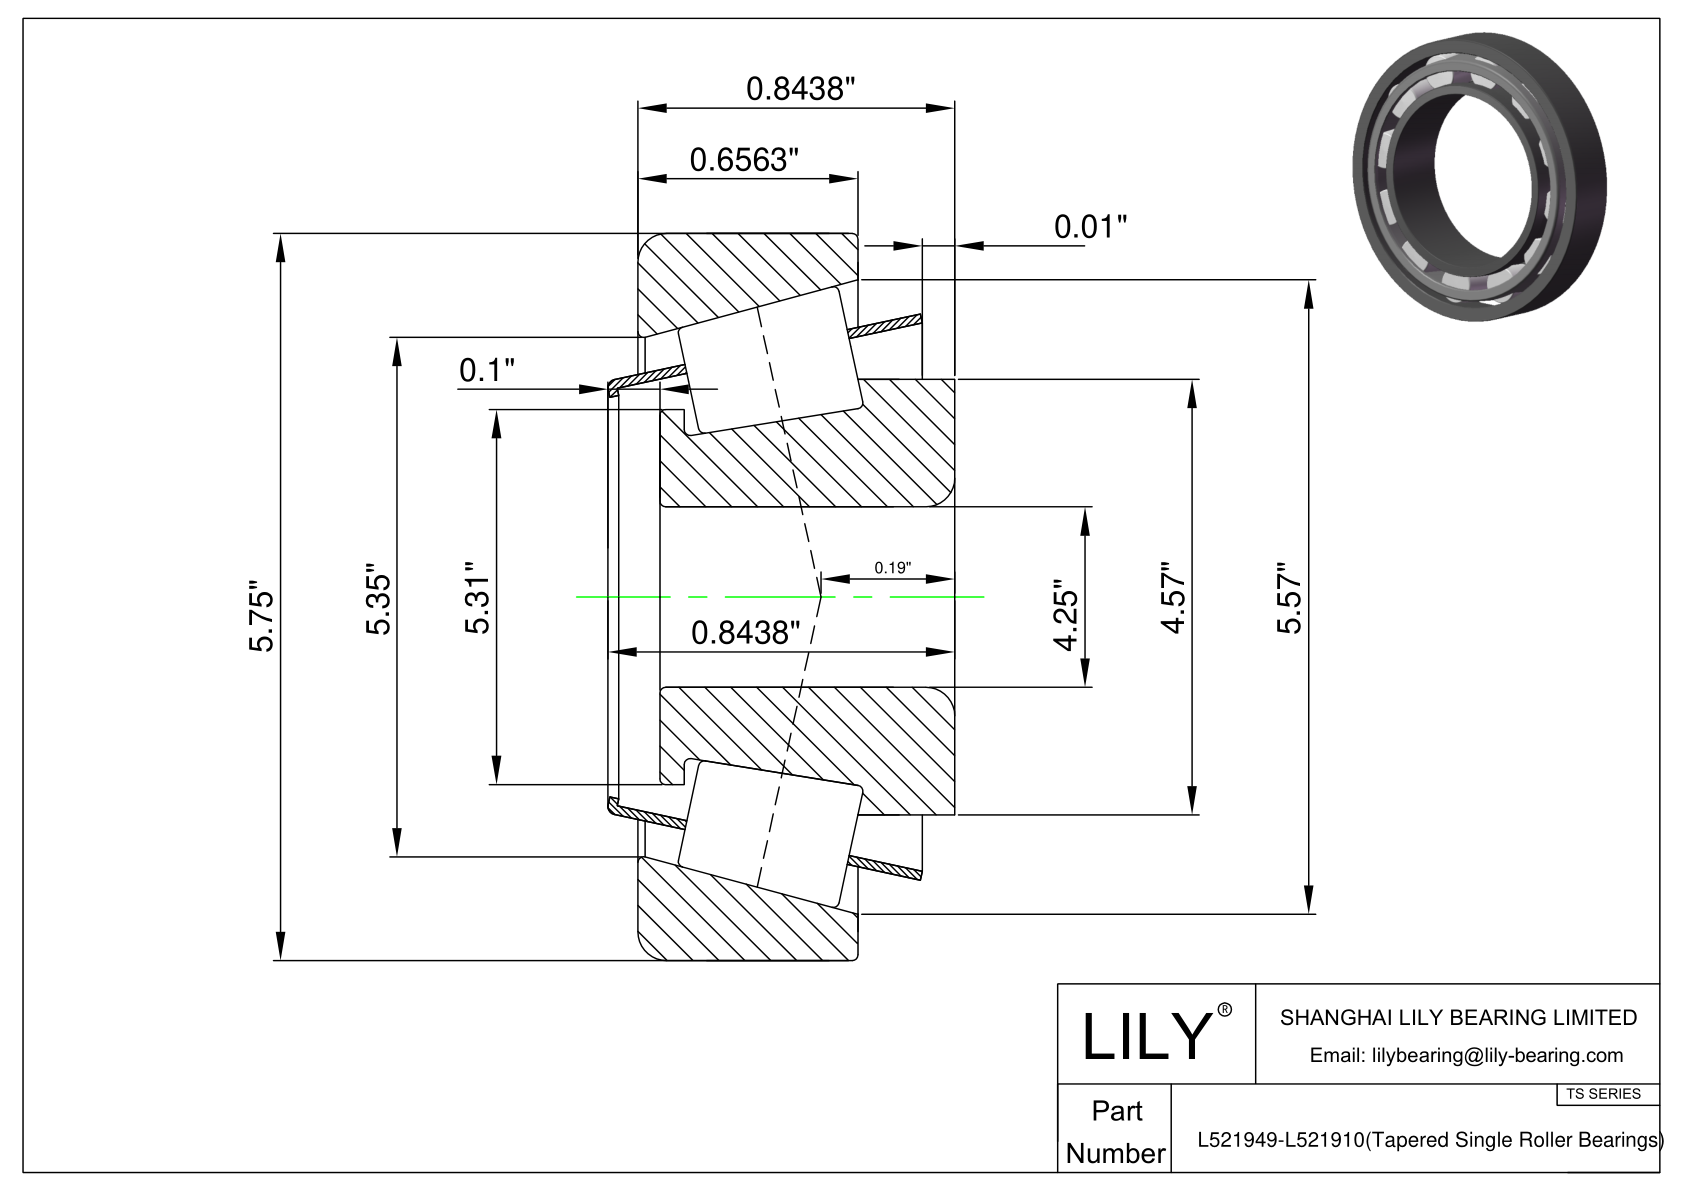 L521949-L521910 TS (Tapered Single Roller Bearings) (Imperial) cad drawing